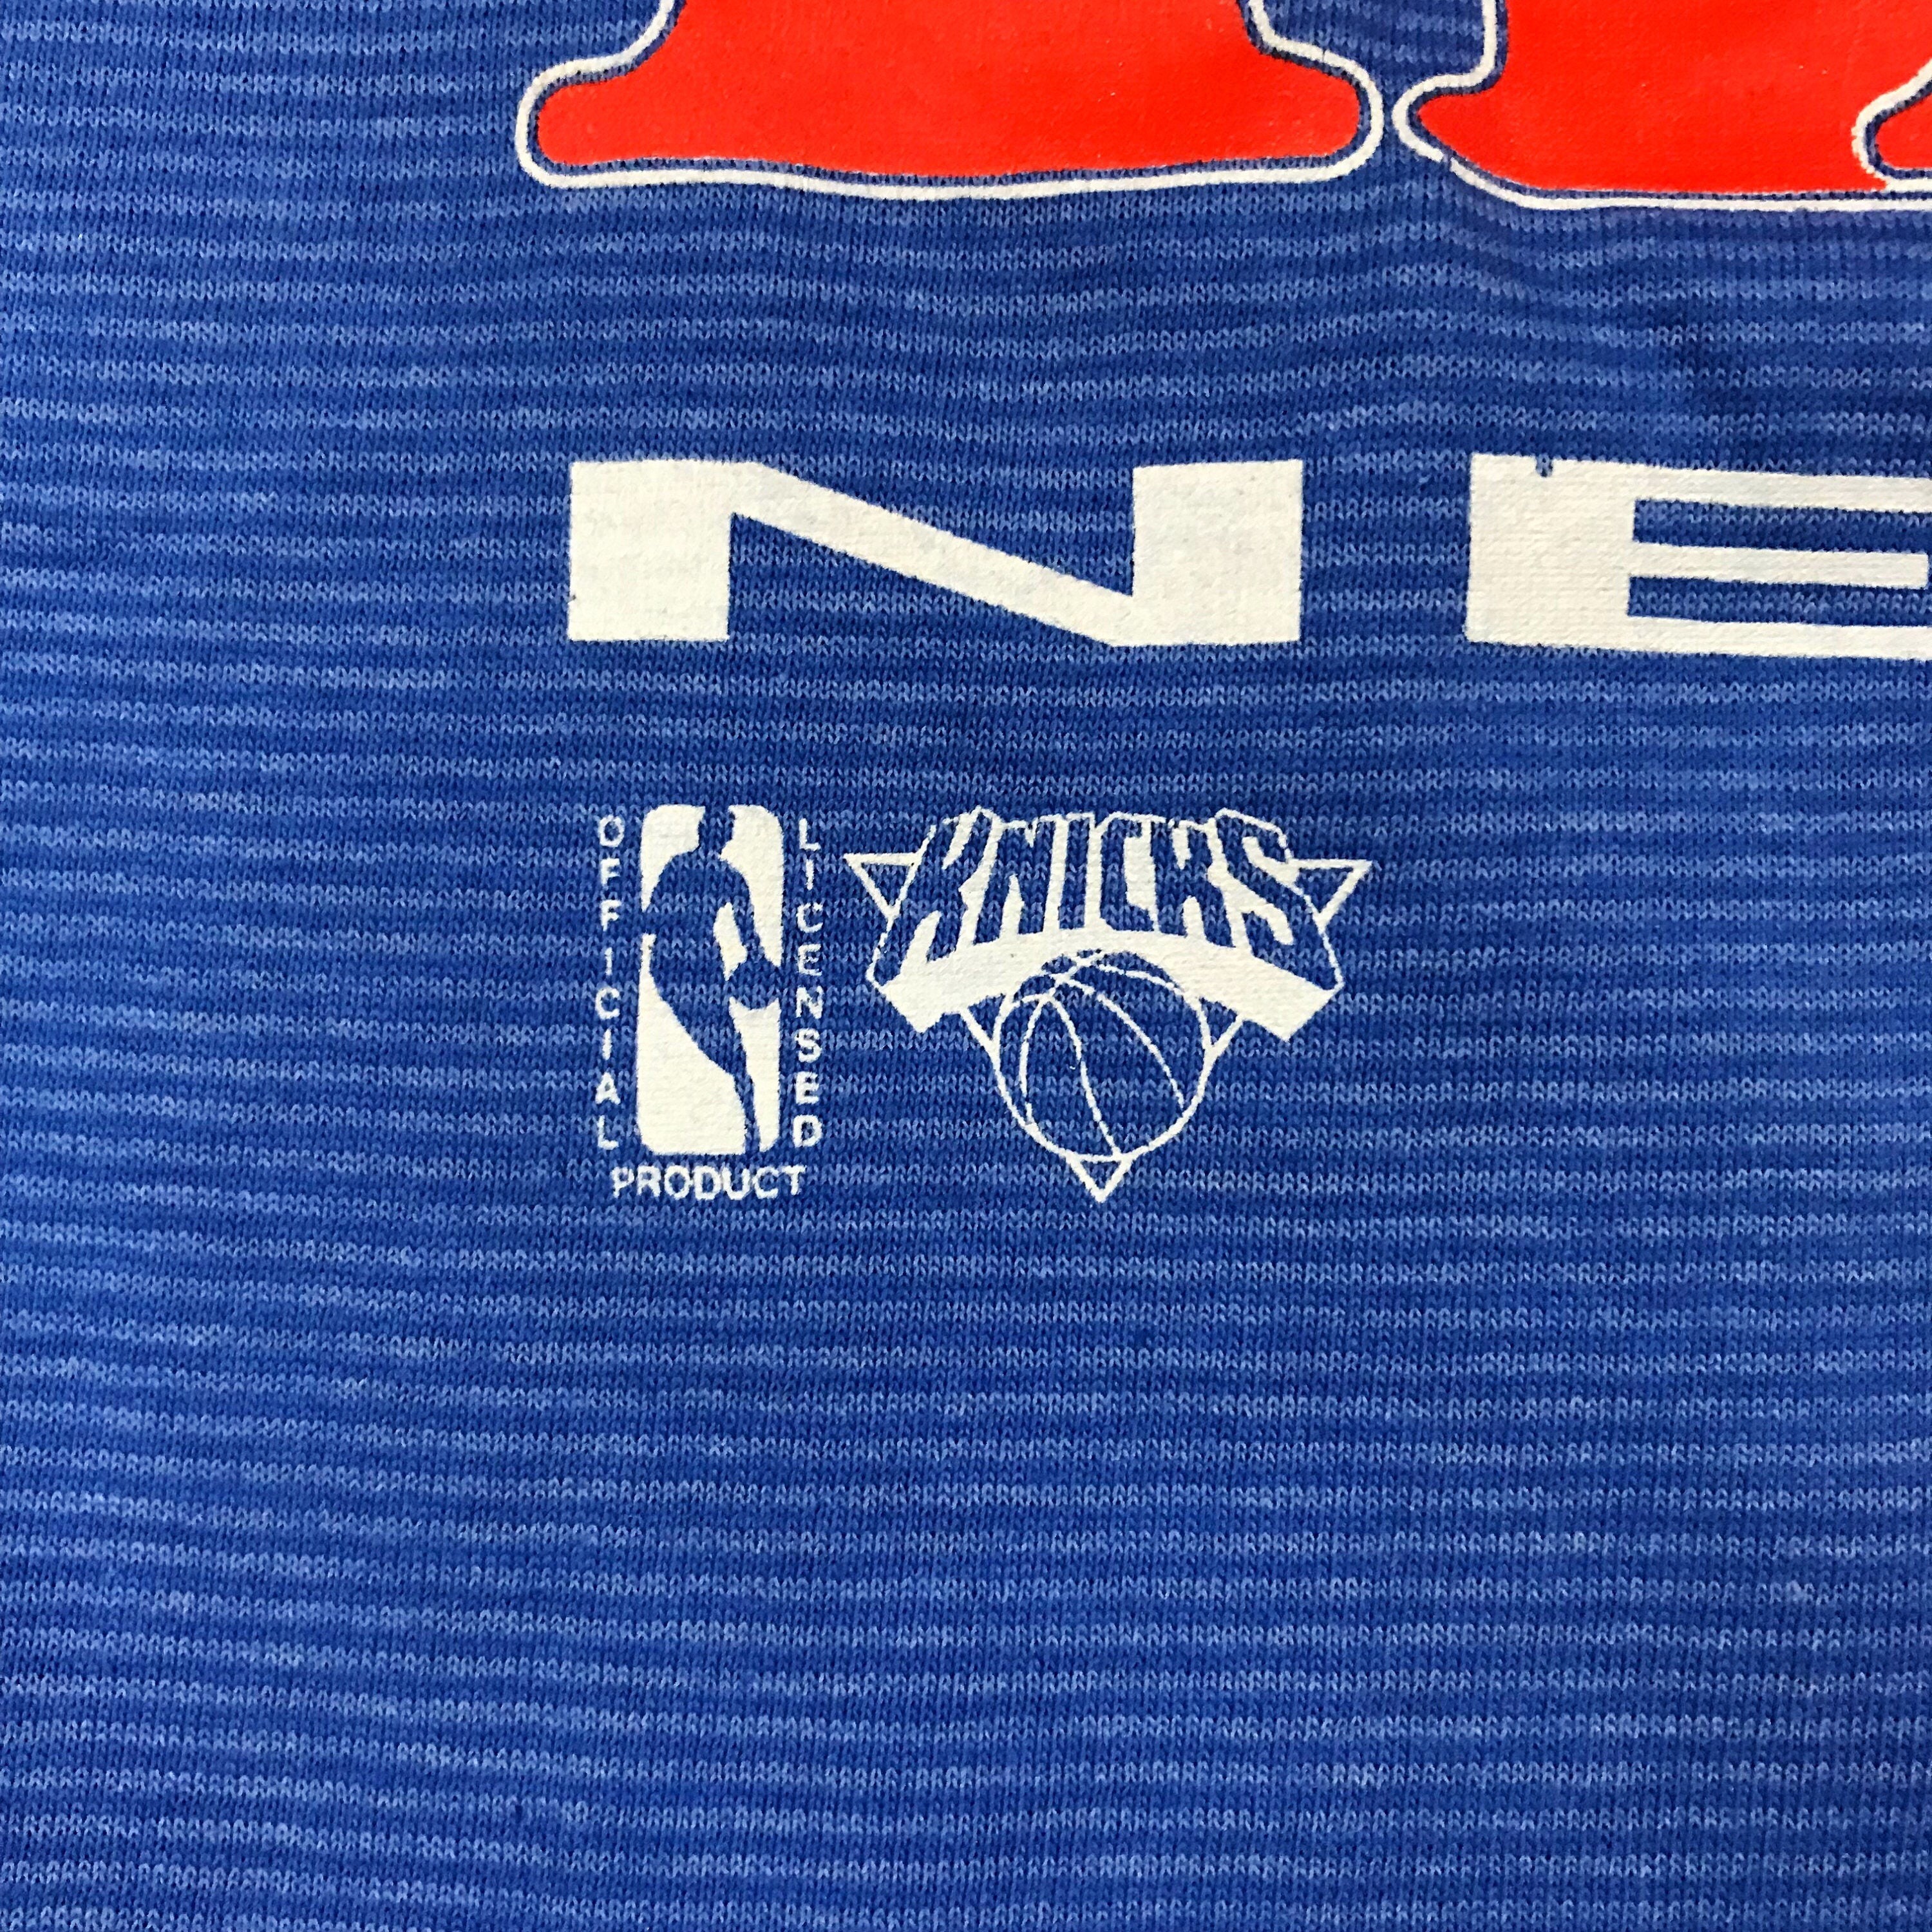 Vintage New York Knicks T-shirt – For All To Envy